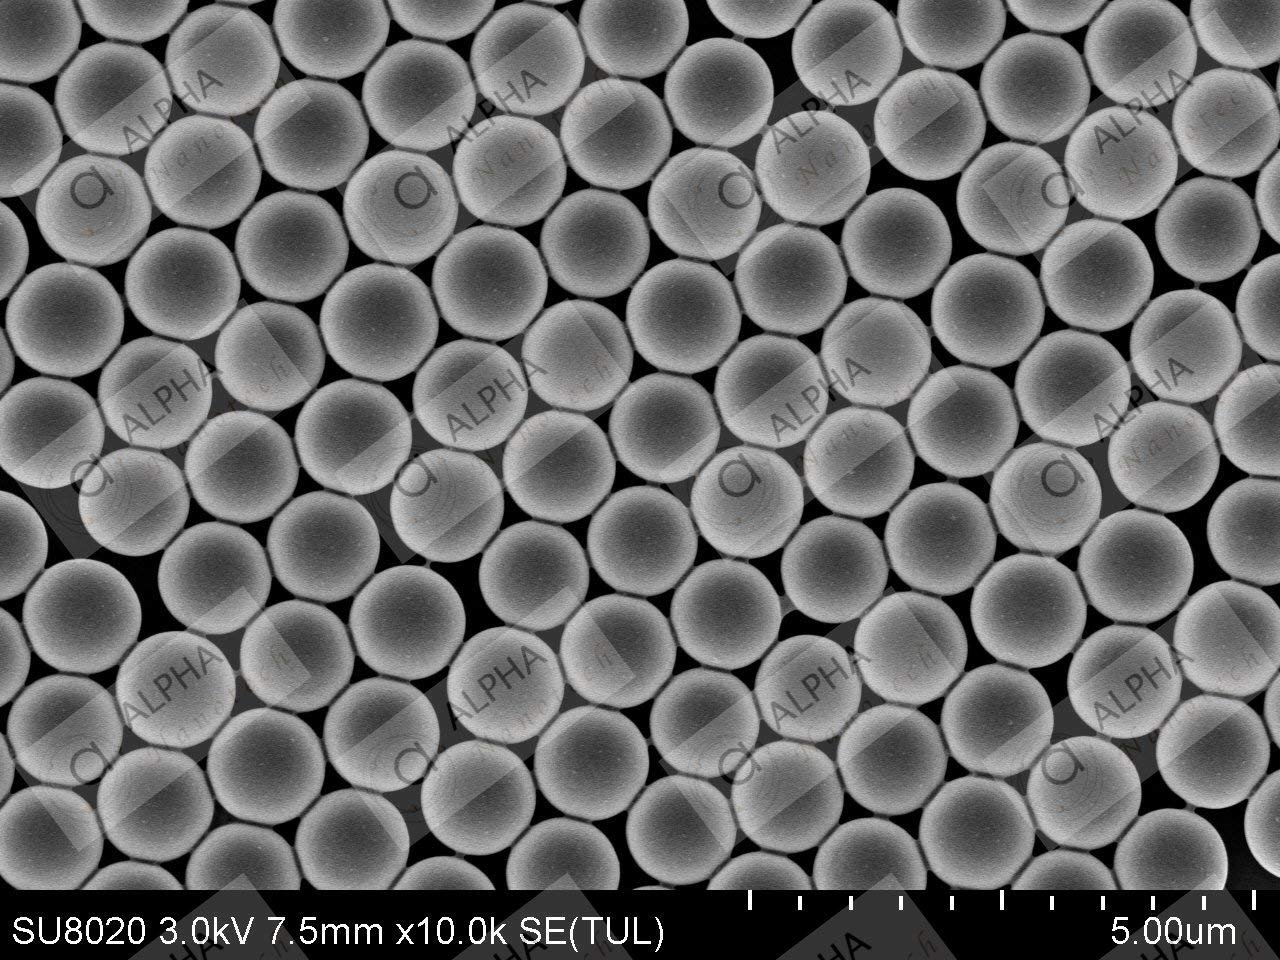 1 Micron Polystyrene Microspheres: Unveiling a World of Scientific Possibilities